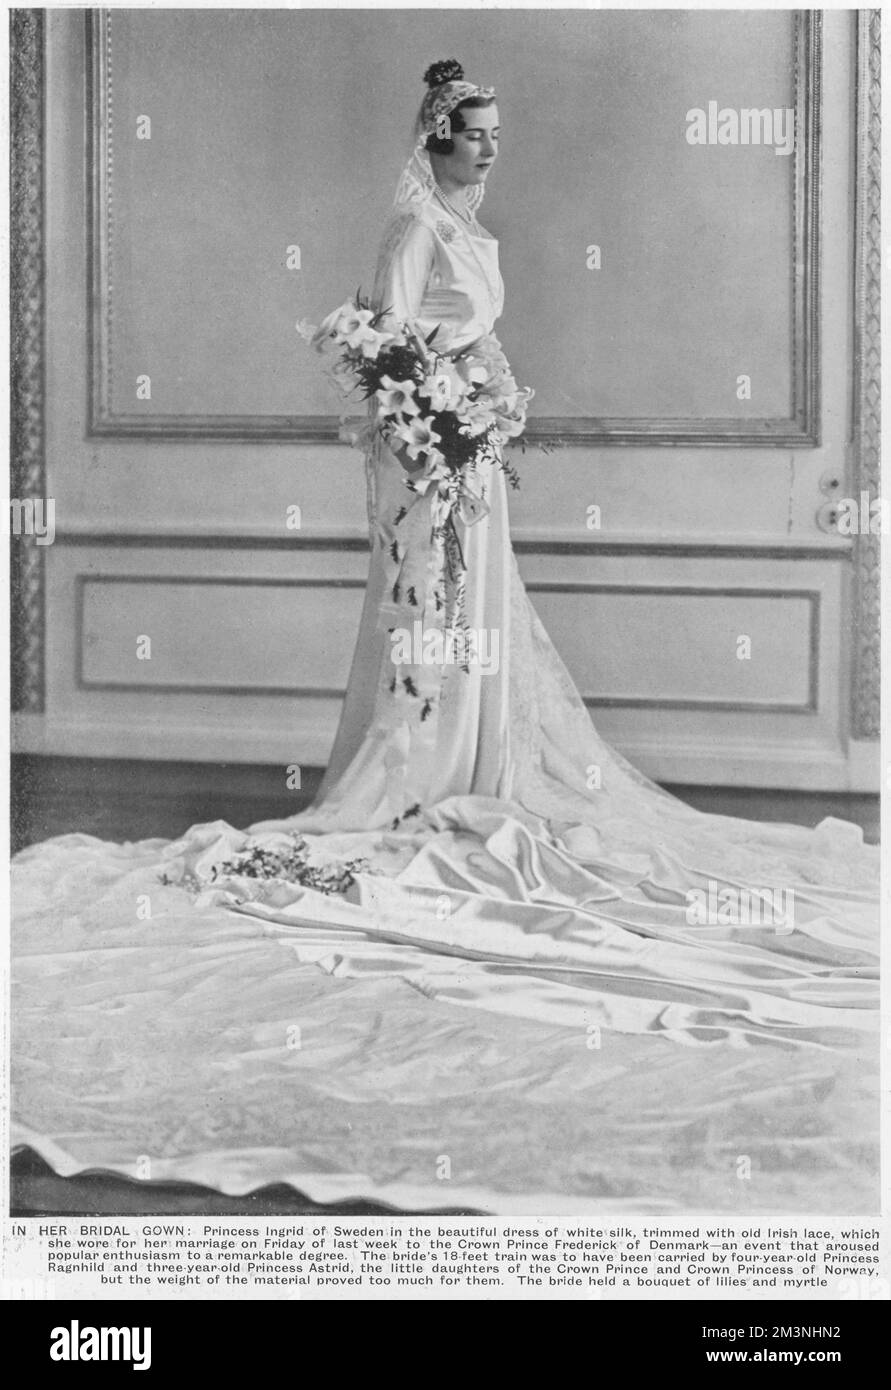 Princess Ingrid of Sweden, pictured on her wedding day to Crown Prince Frederick of Denmark.  Her dress of white silk was trimmed with old Irish lace and had an 18 foot train.  Her bouquet consisted of myrtle and lilies.  1935 Stock Photo